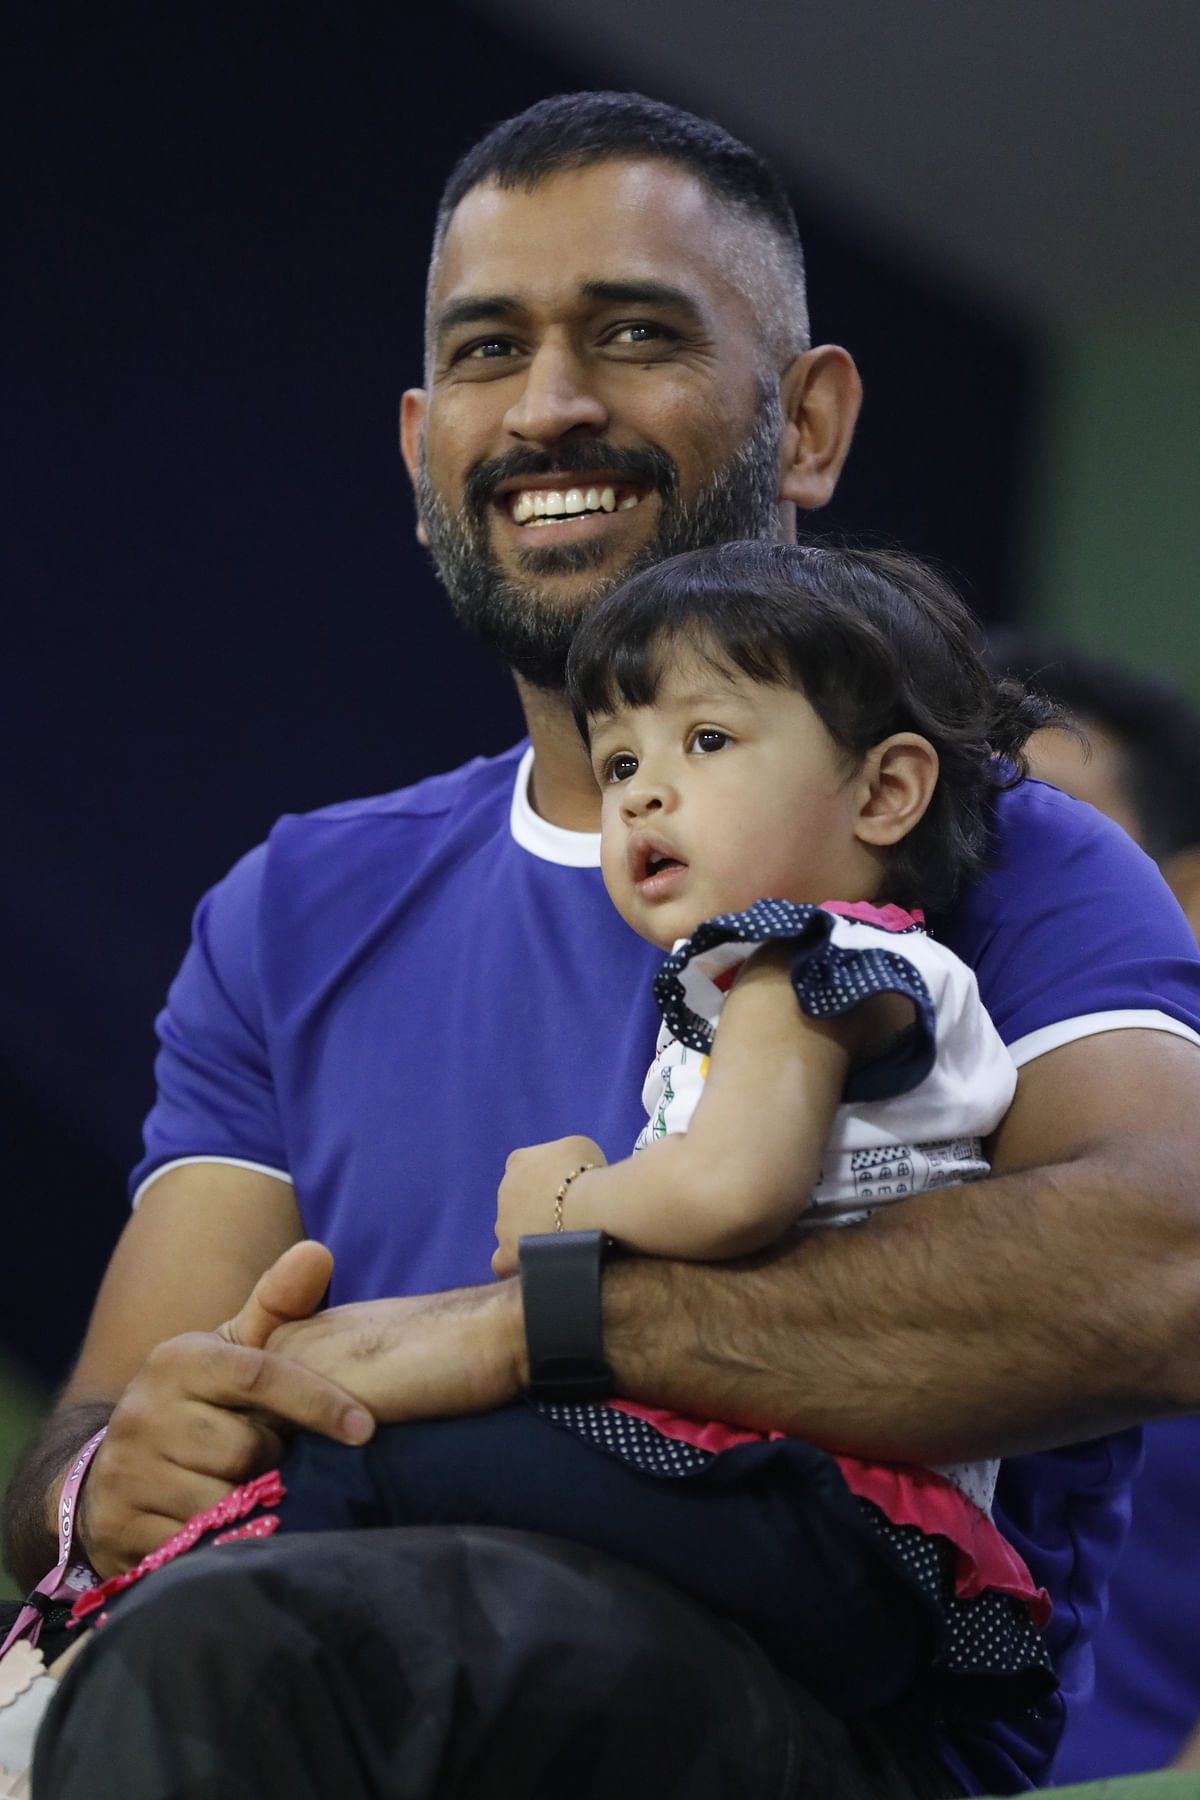 Take a look at Ziva Dhoni enjoying an ISL match with her parents MS Dhoni and Sakshi Dhoni.